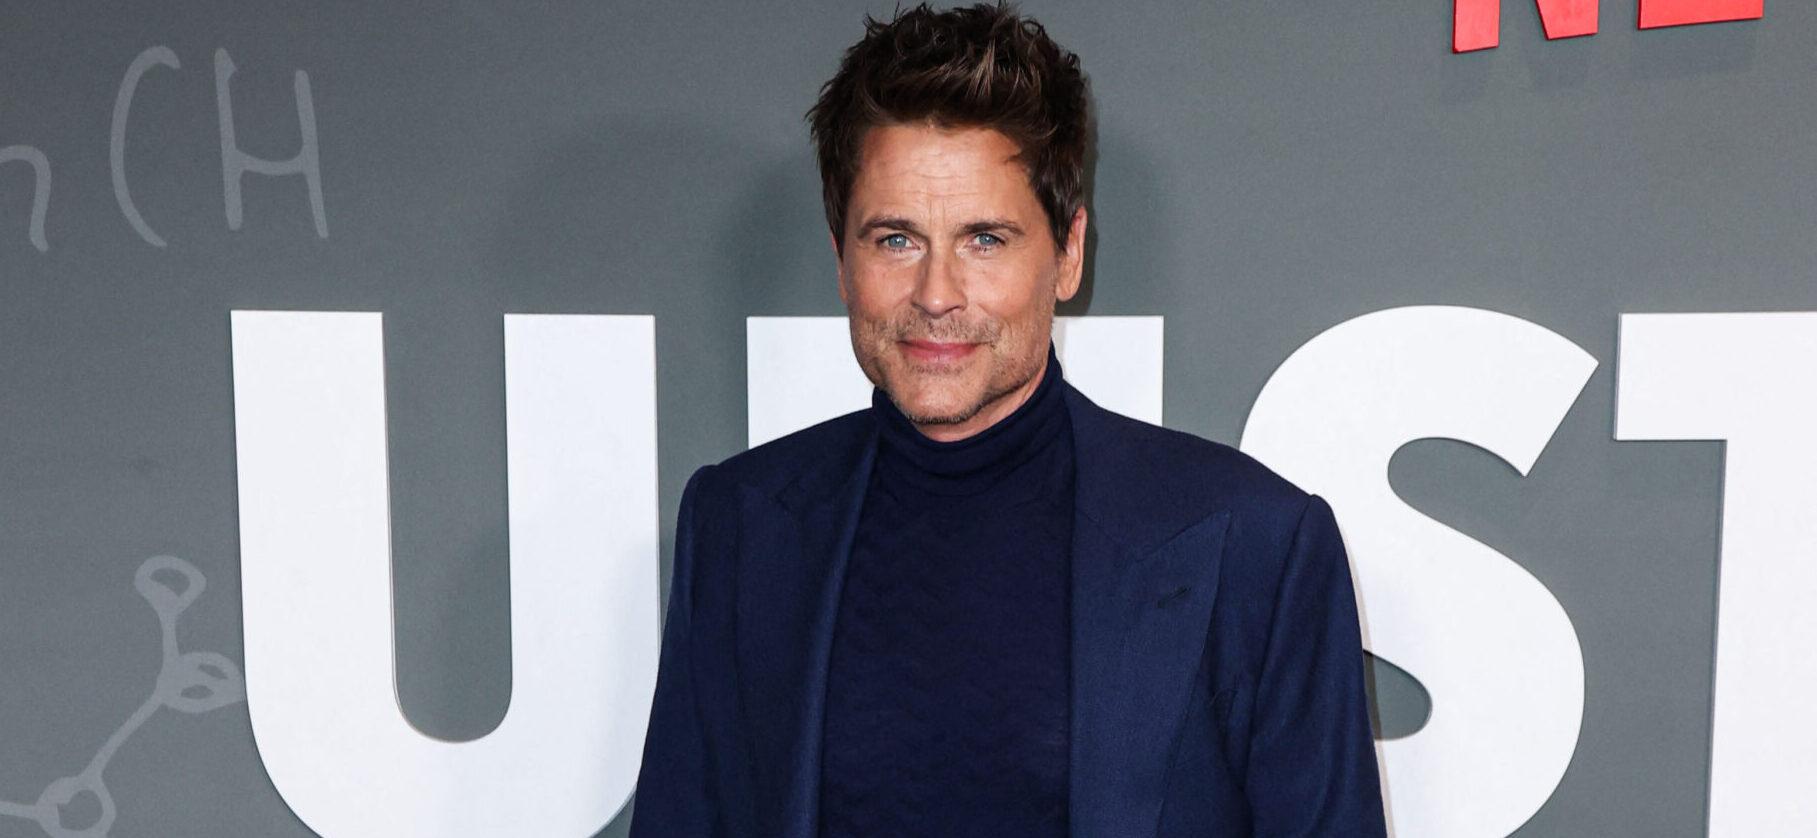 Rob Lowe Marks 33 Years of Sobriety With Shirtless Selfie